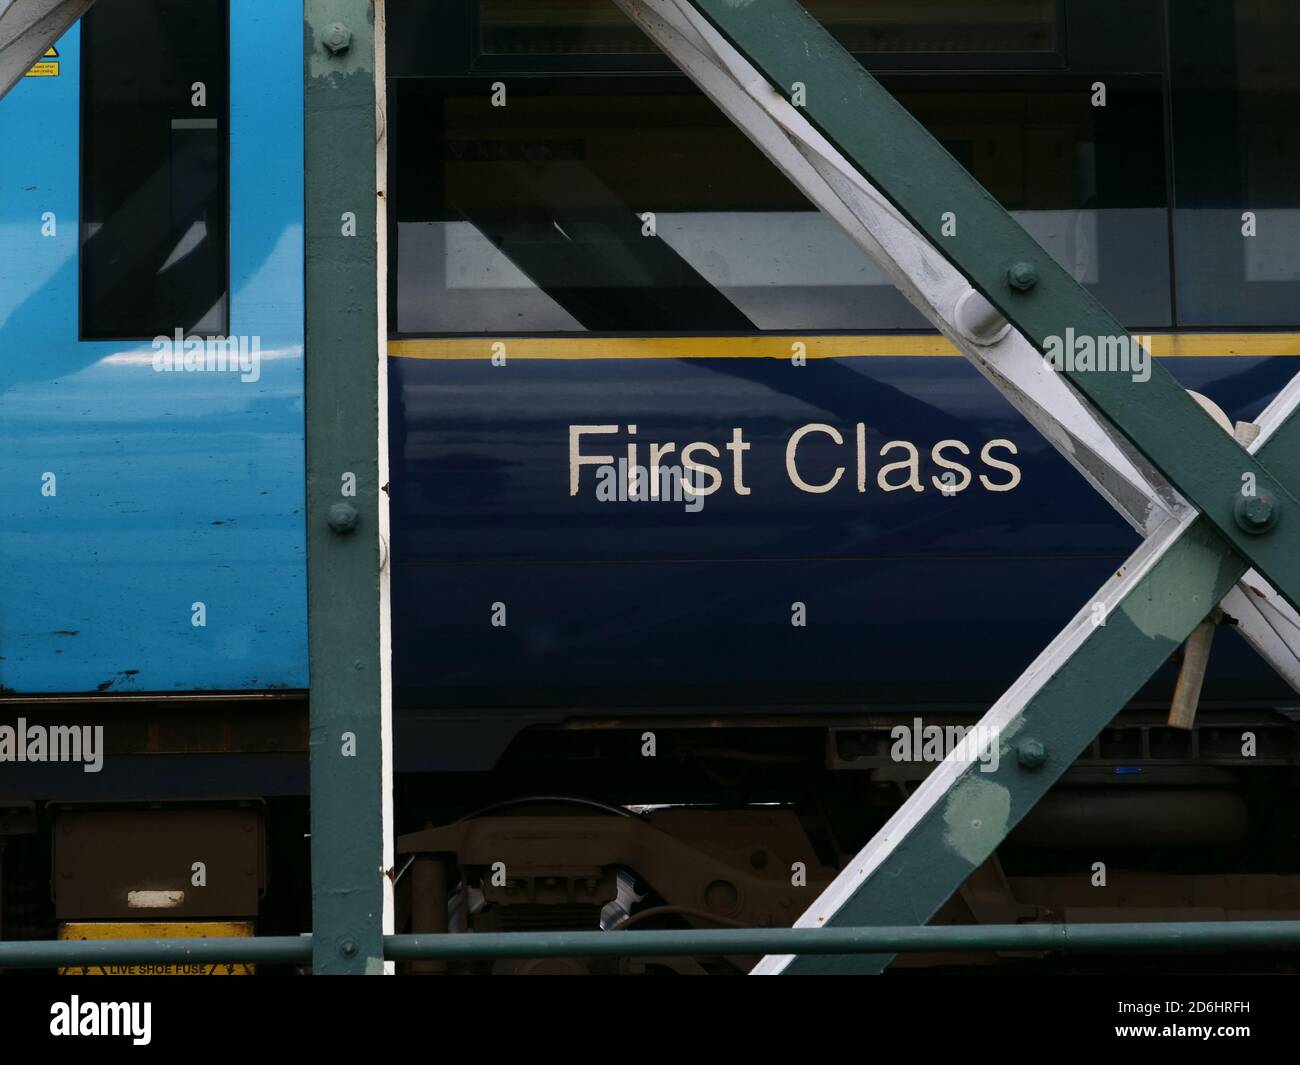 First Class sign seen on the side of a train carriage. Stock Photo